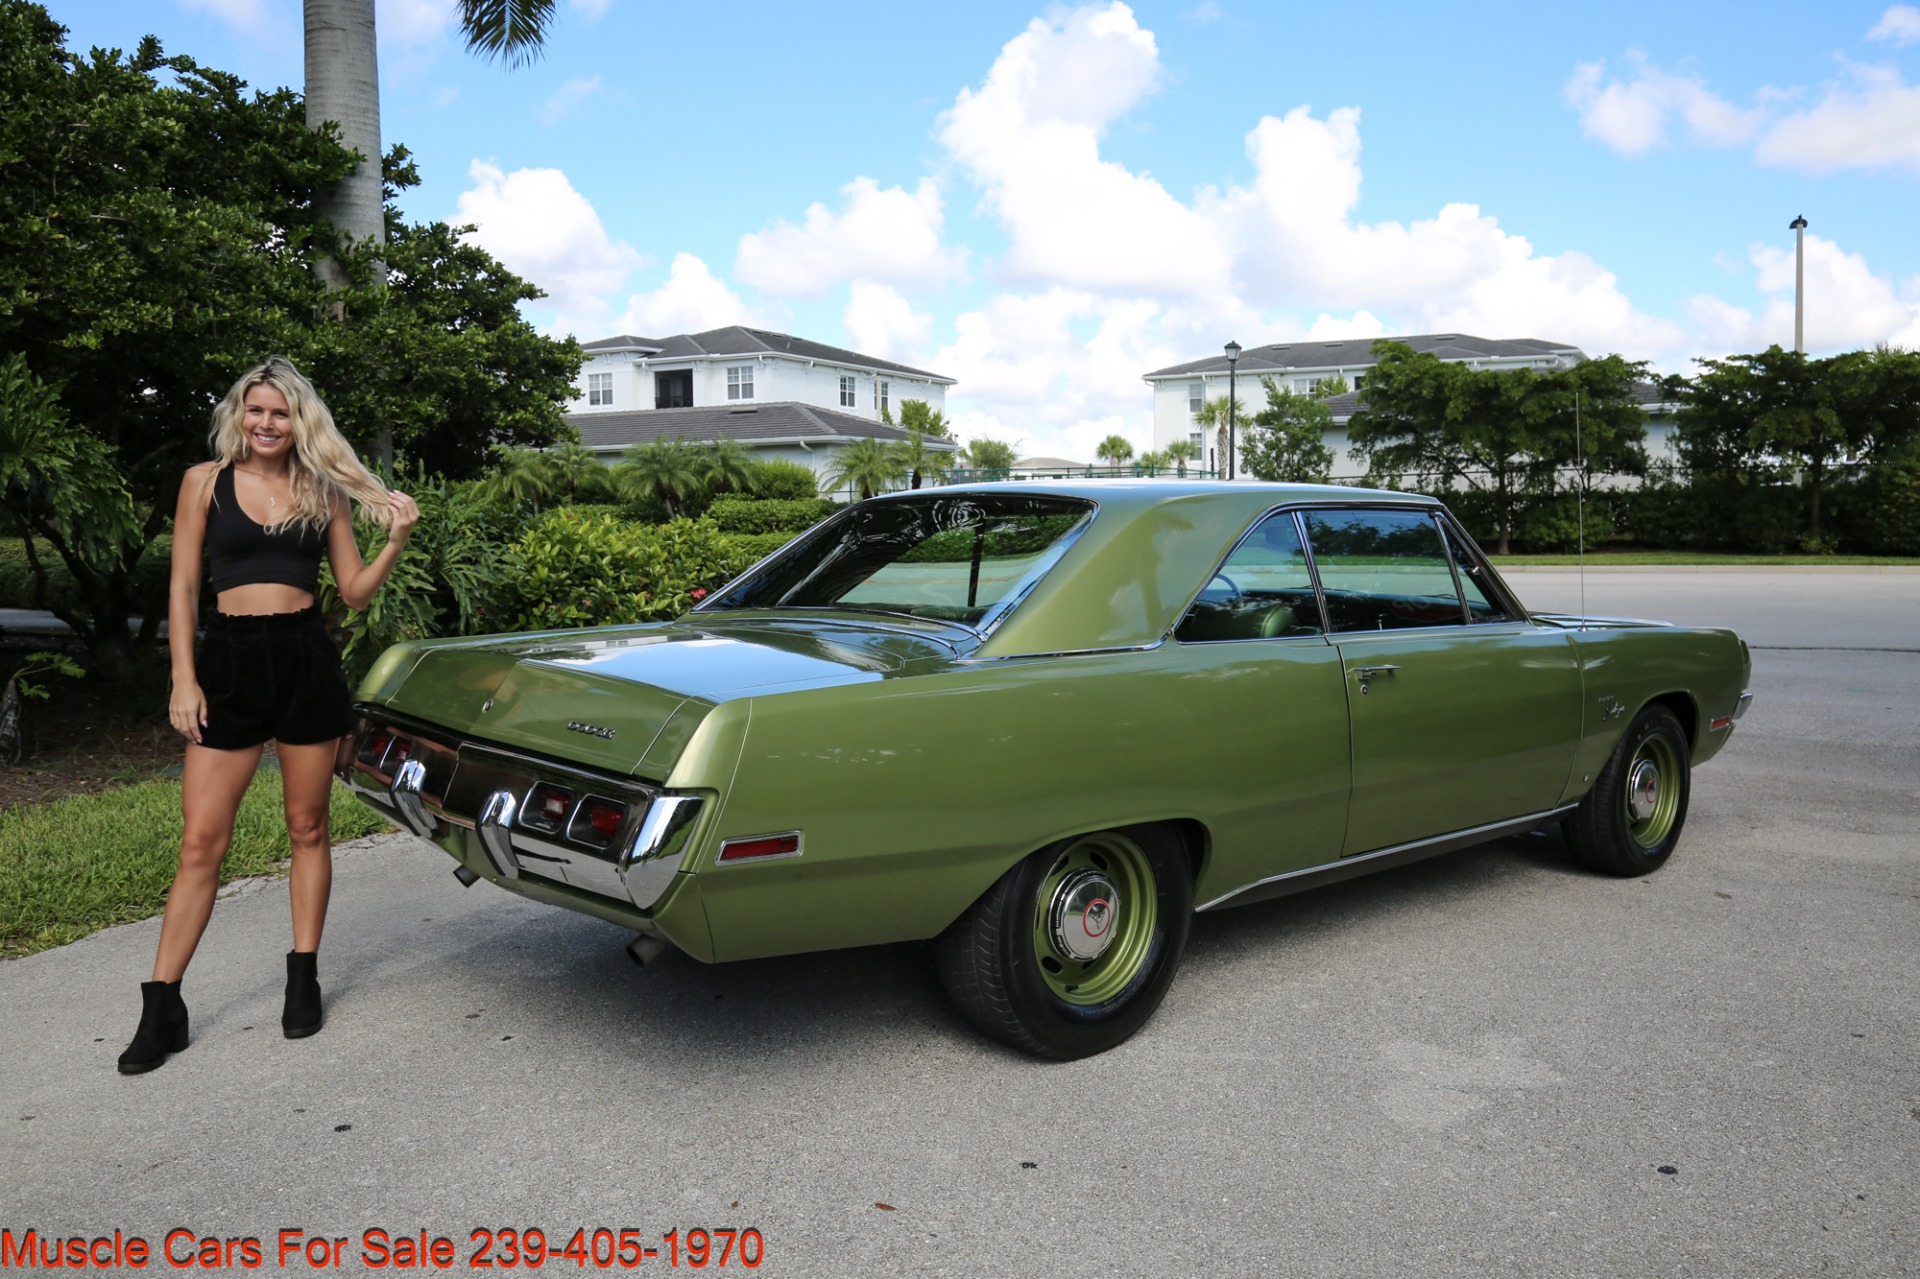 Used 1971 Dodge Dart Swinger For Sale ($24,700) Muscle Cars for Sale